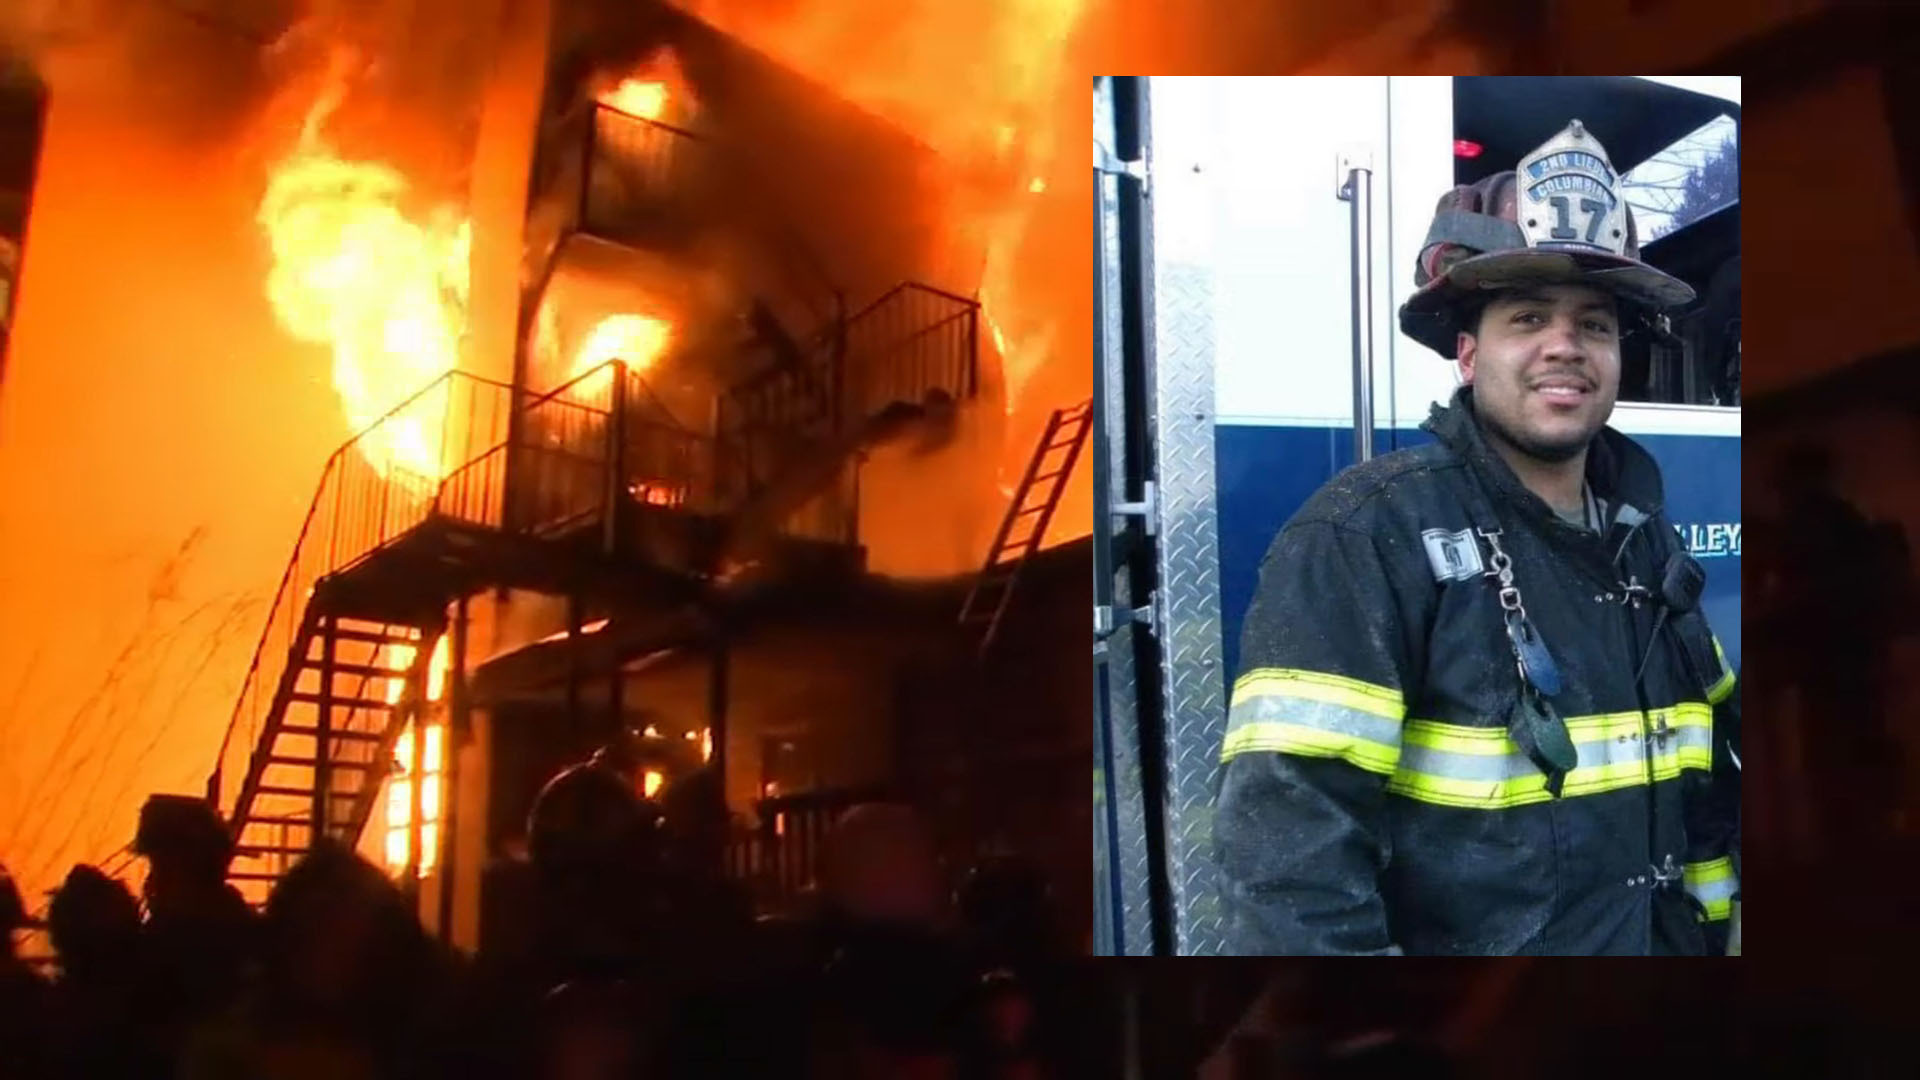 Rockland Nursing Home Fire with firefighter 1